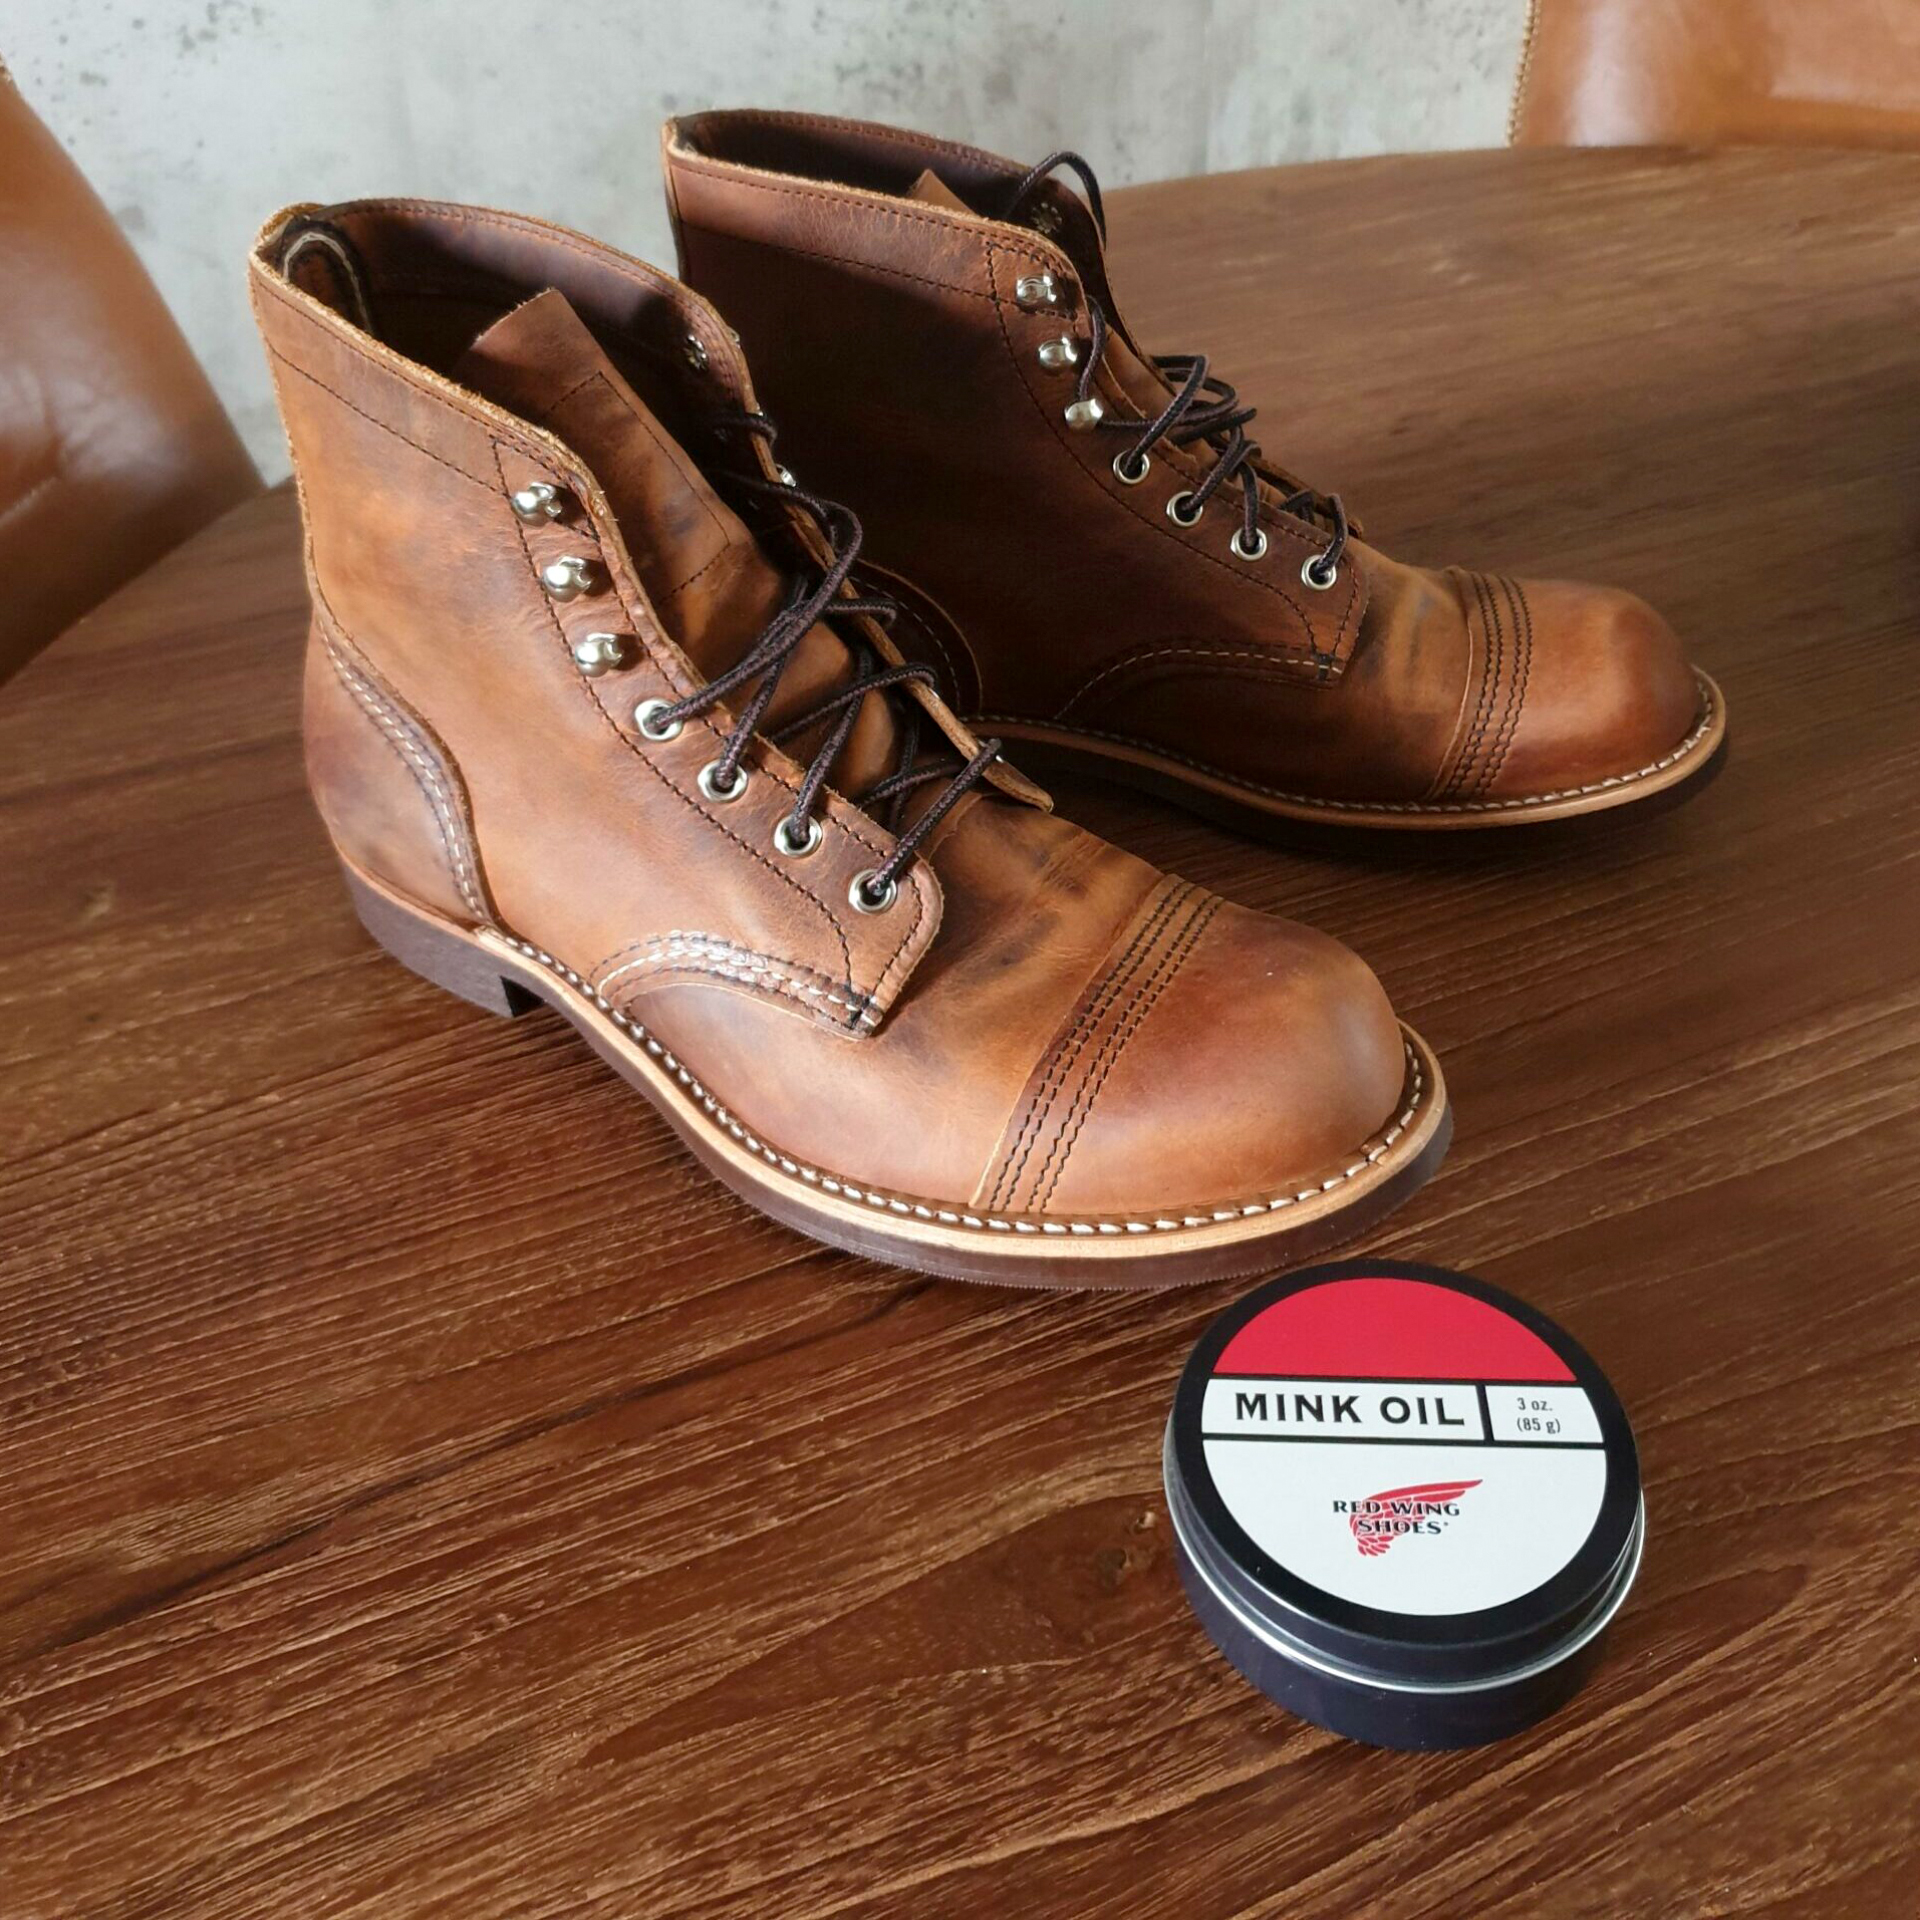 what is mink oil